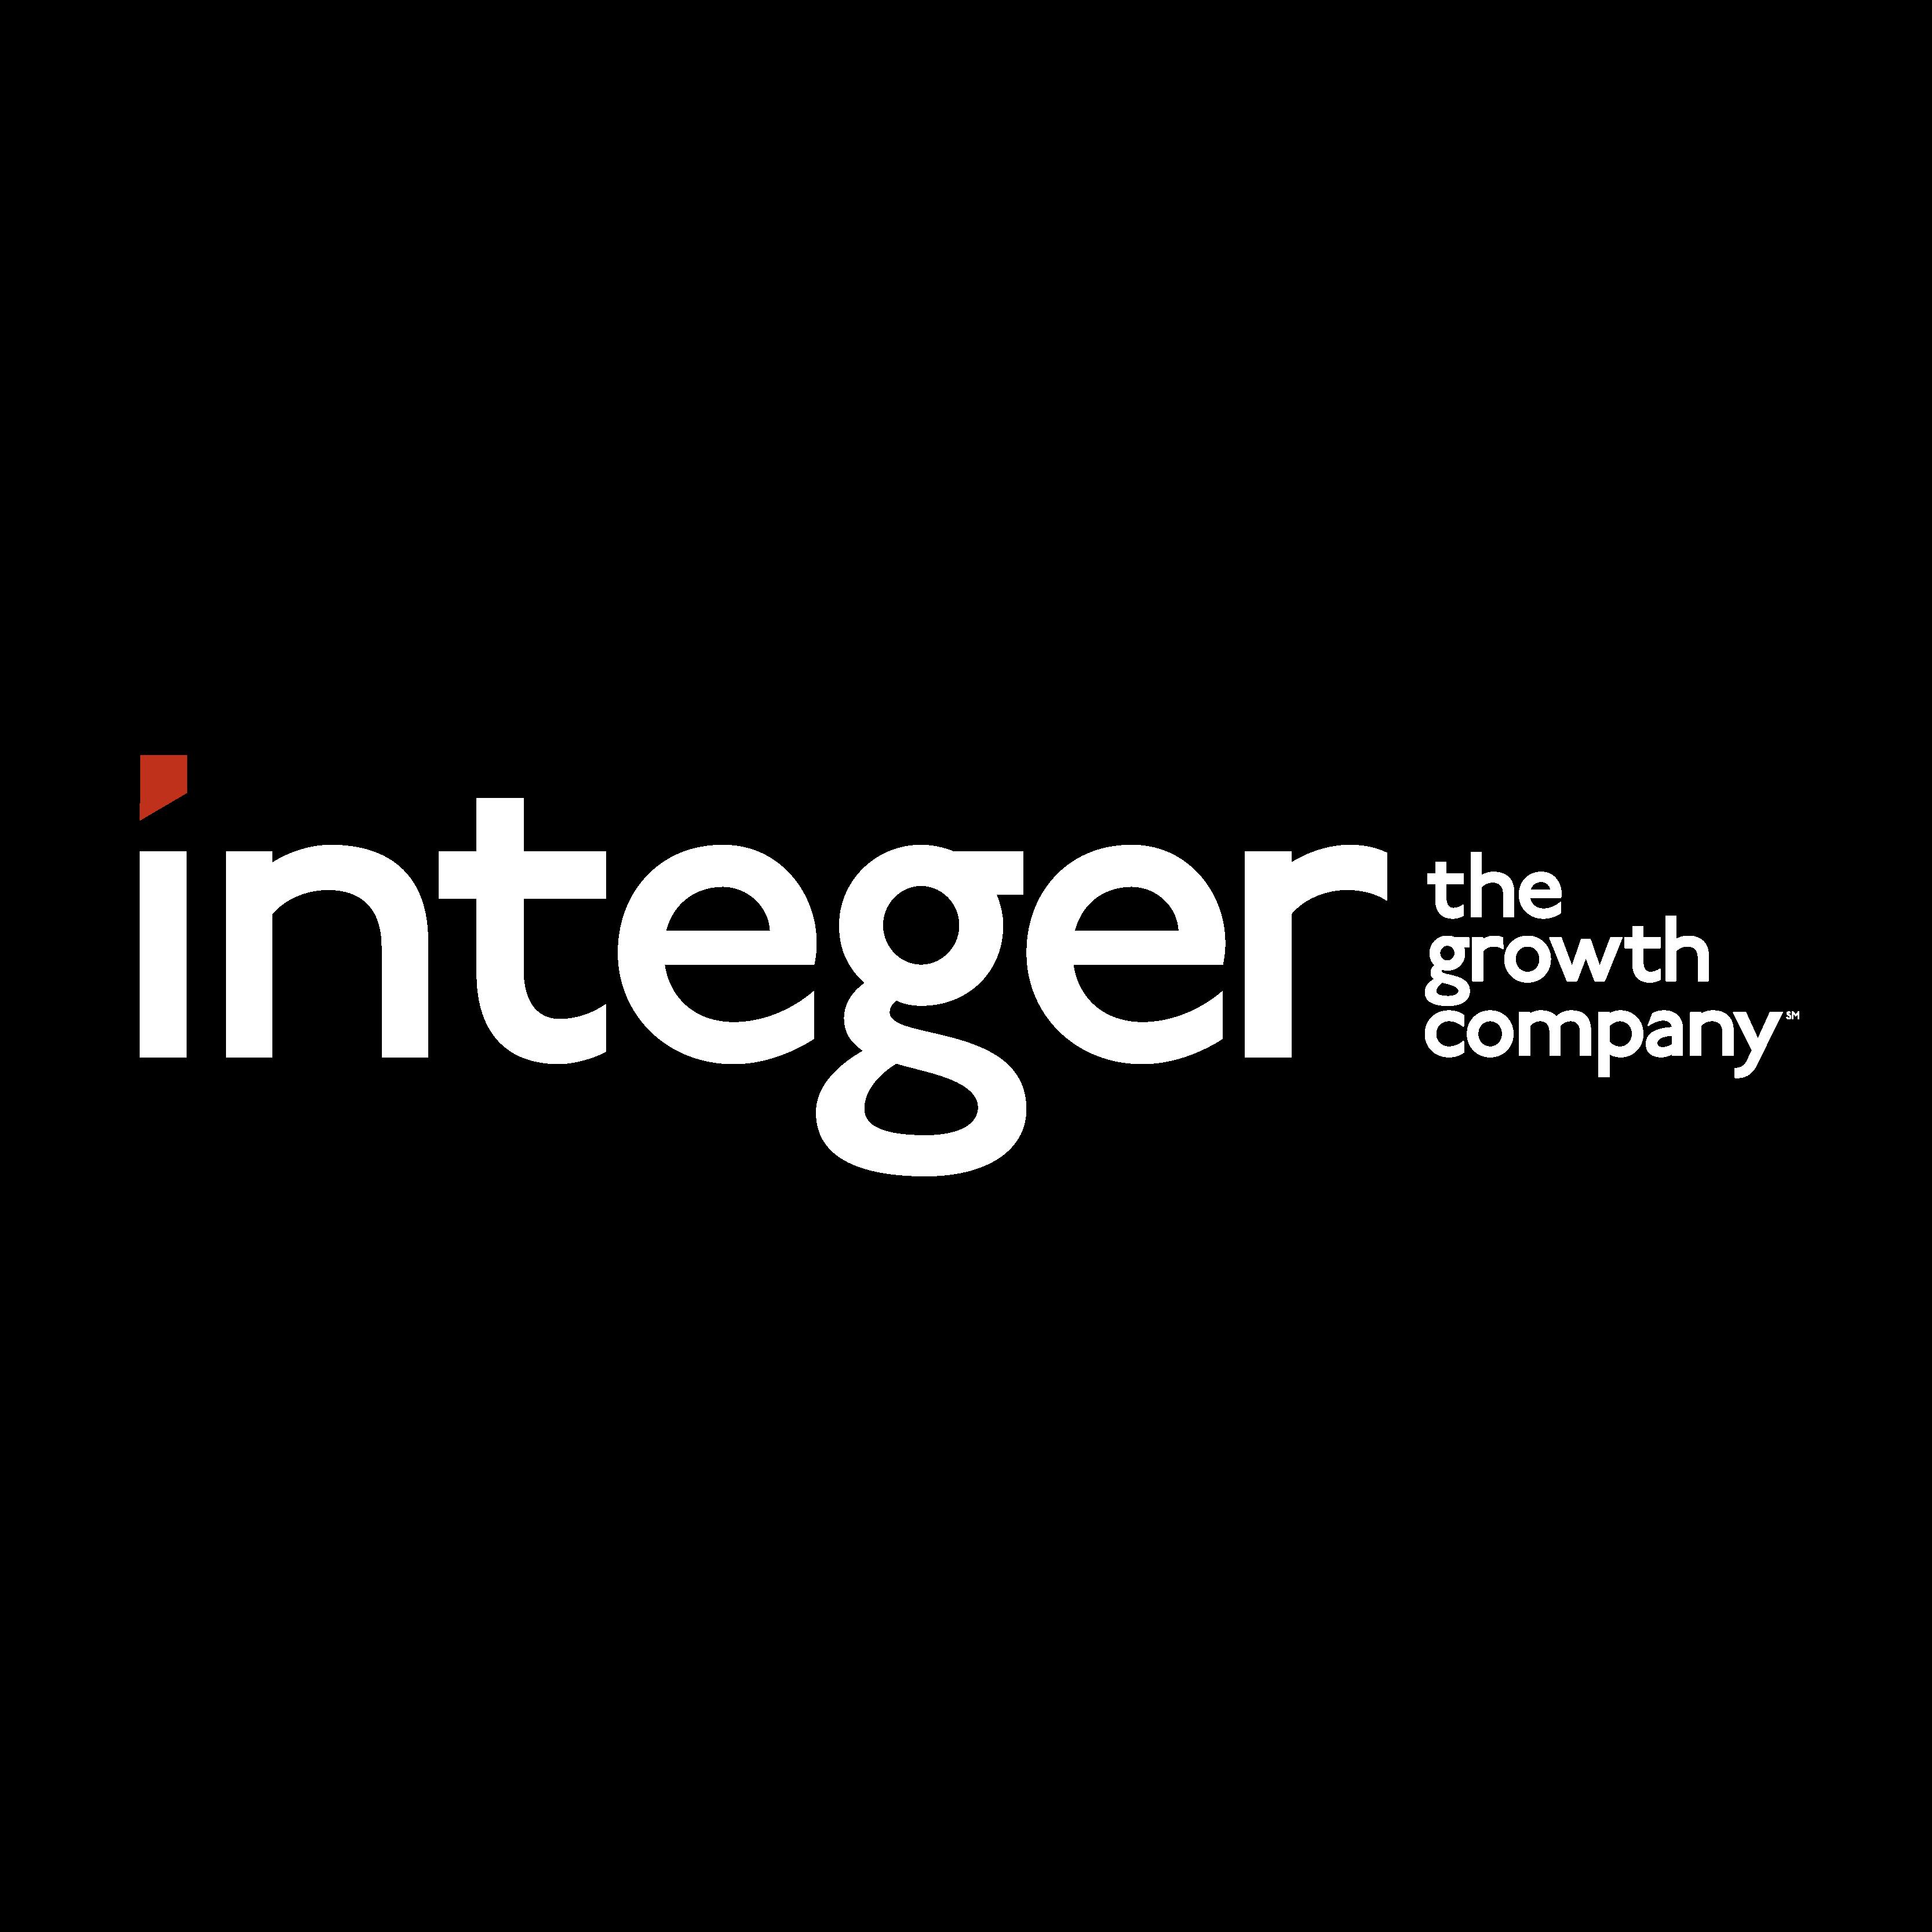 The Integer Group